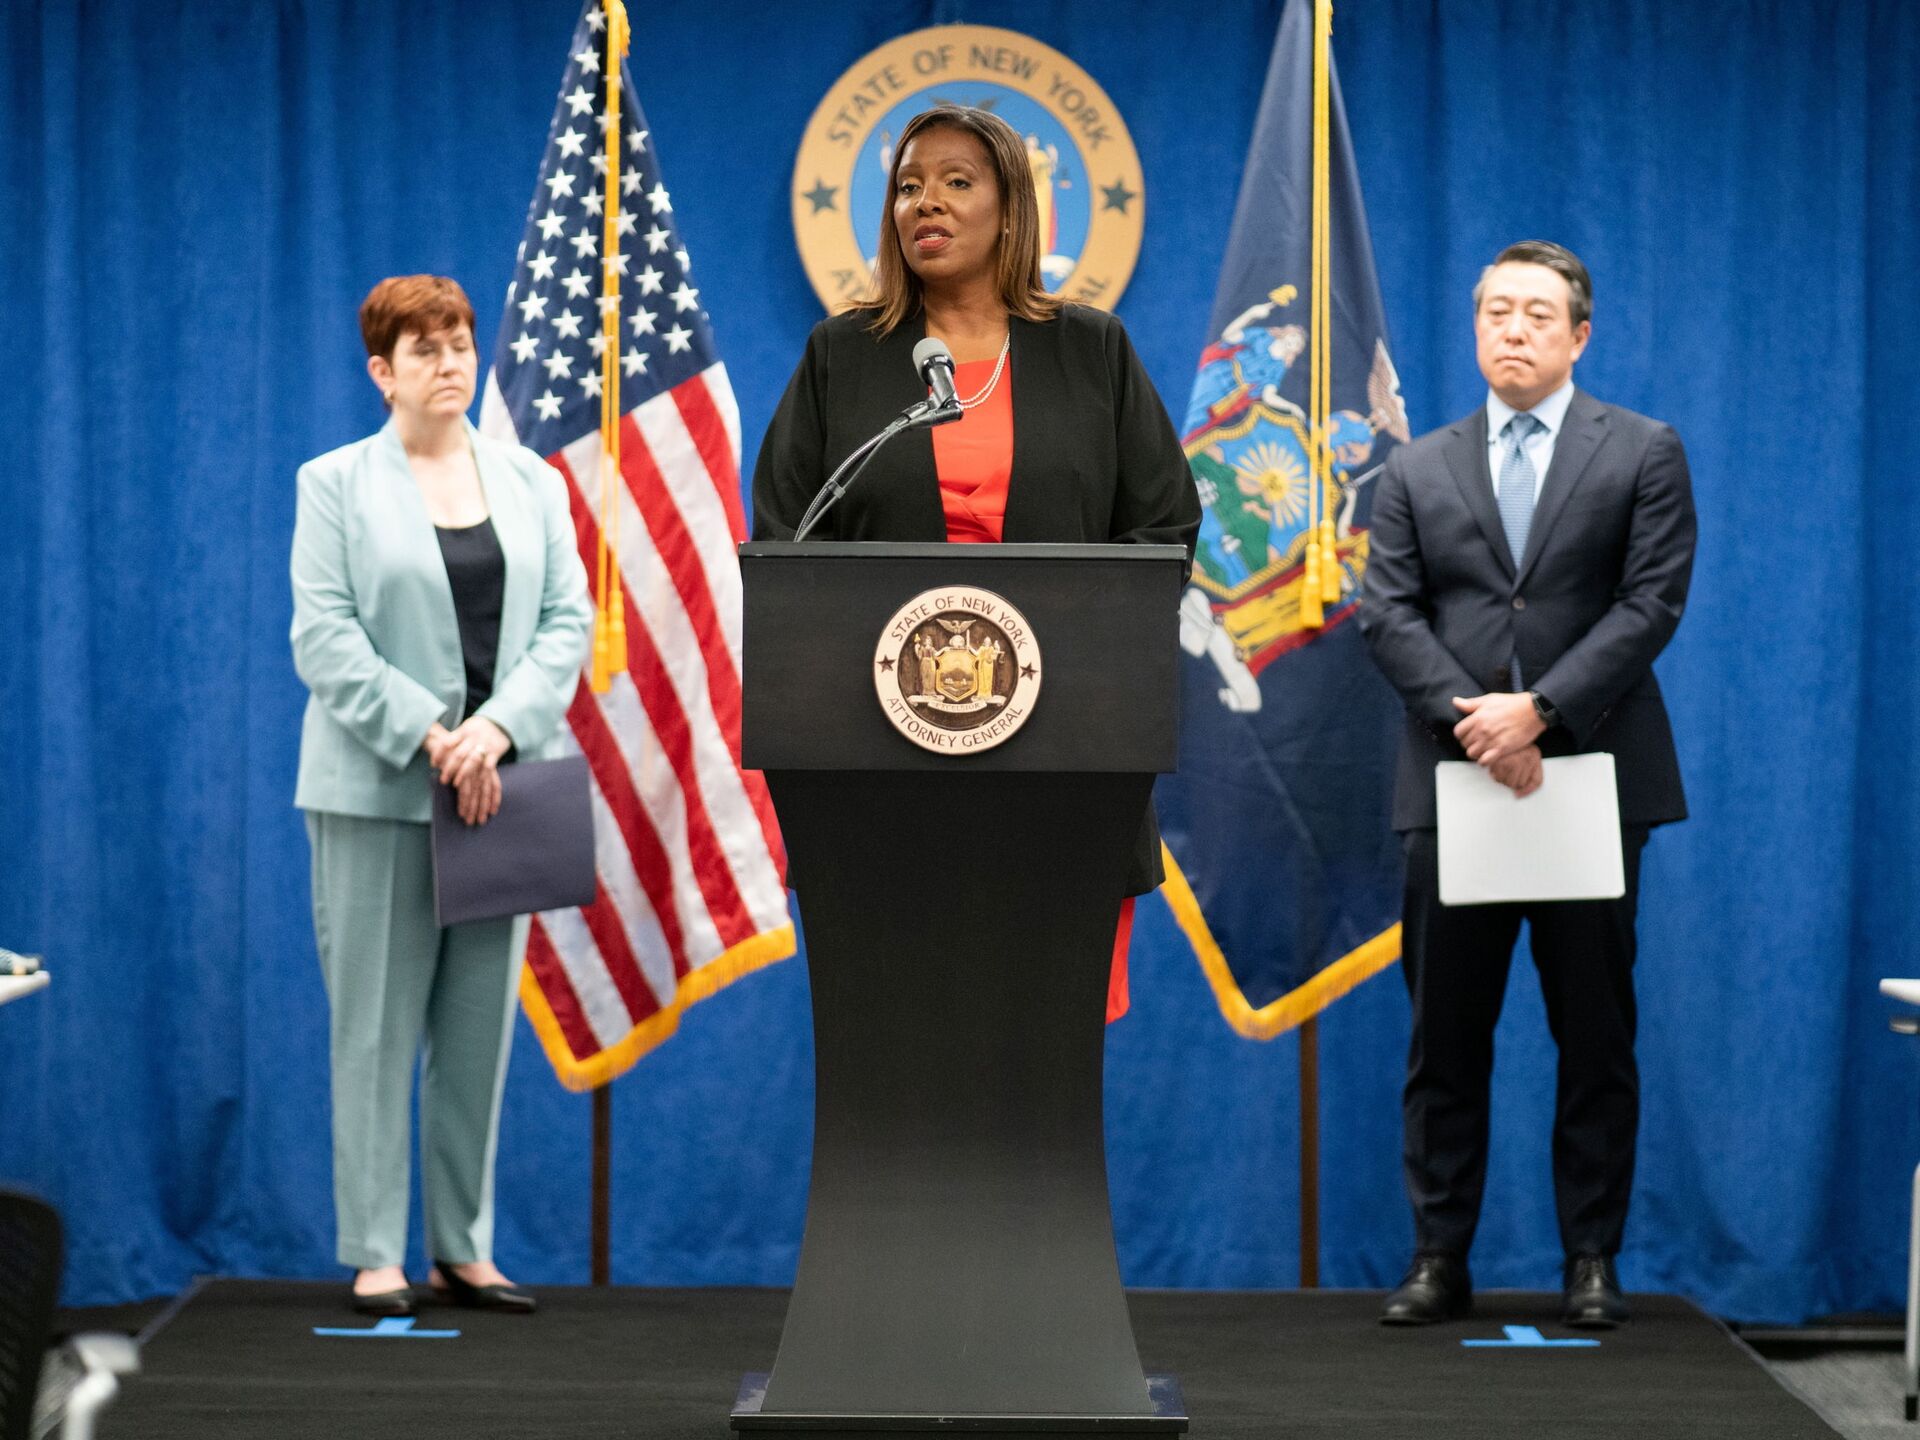 New York State Attorney General, Letitia James, speaks next to independent investigators Joon H. Kim and Anne L. Clark during a news conference regarding a probe that found New York Governor Andrew Cuomo sexually harassed multiple women, in New York City, New York, U.S., August 3, 2021 - Sputnik International, 1920, 07.09.2021